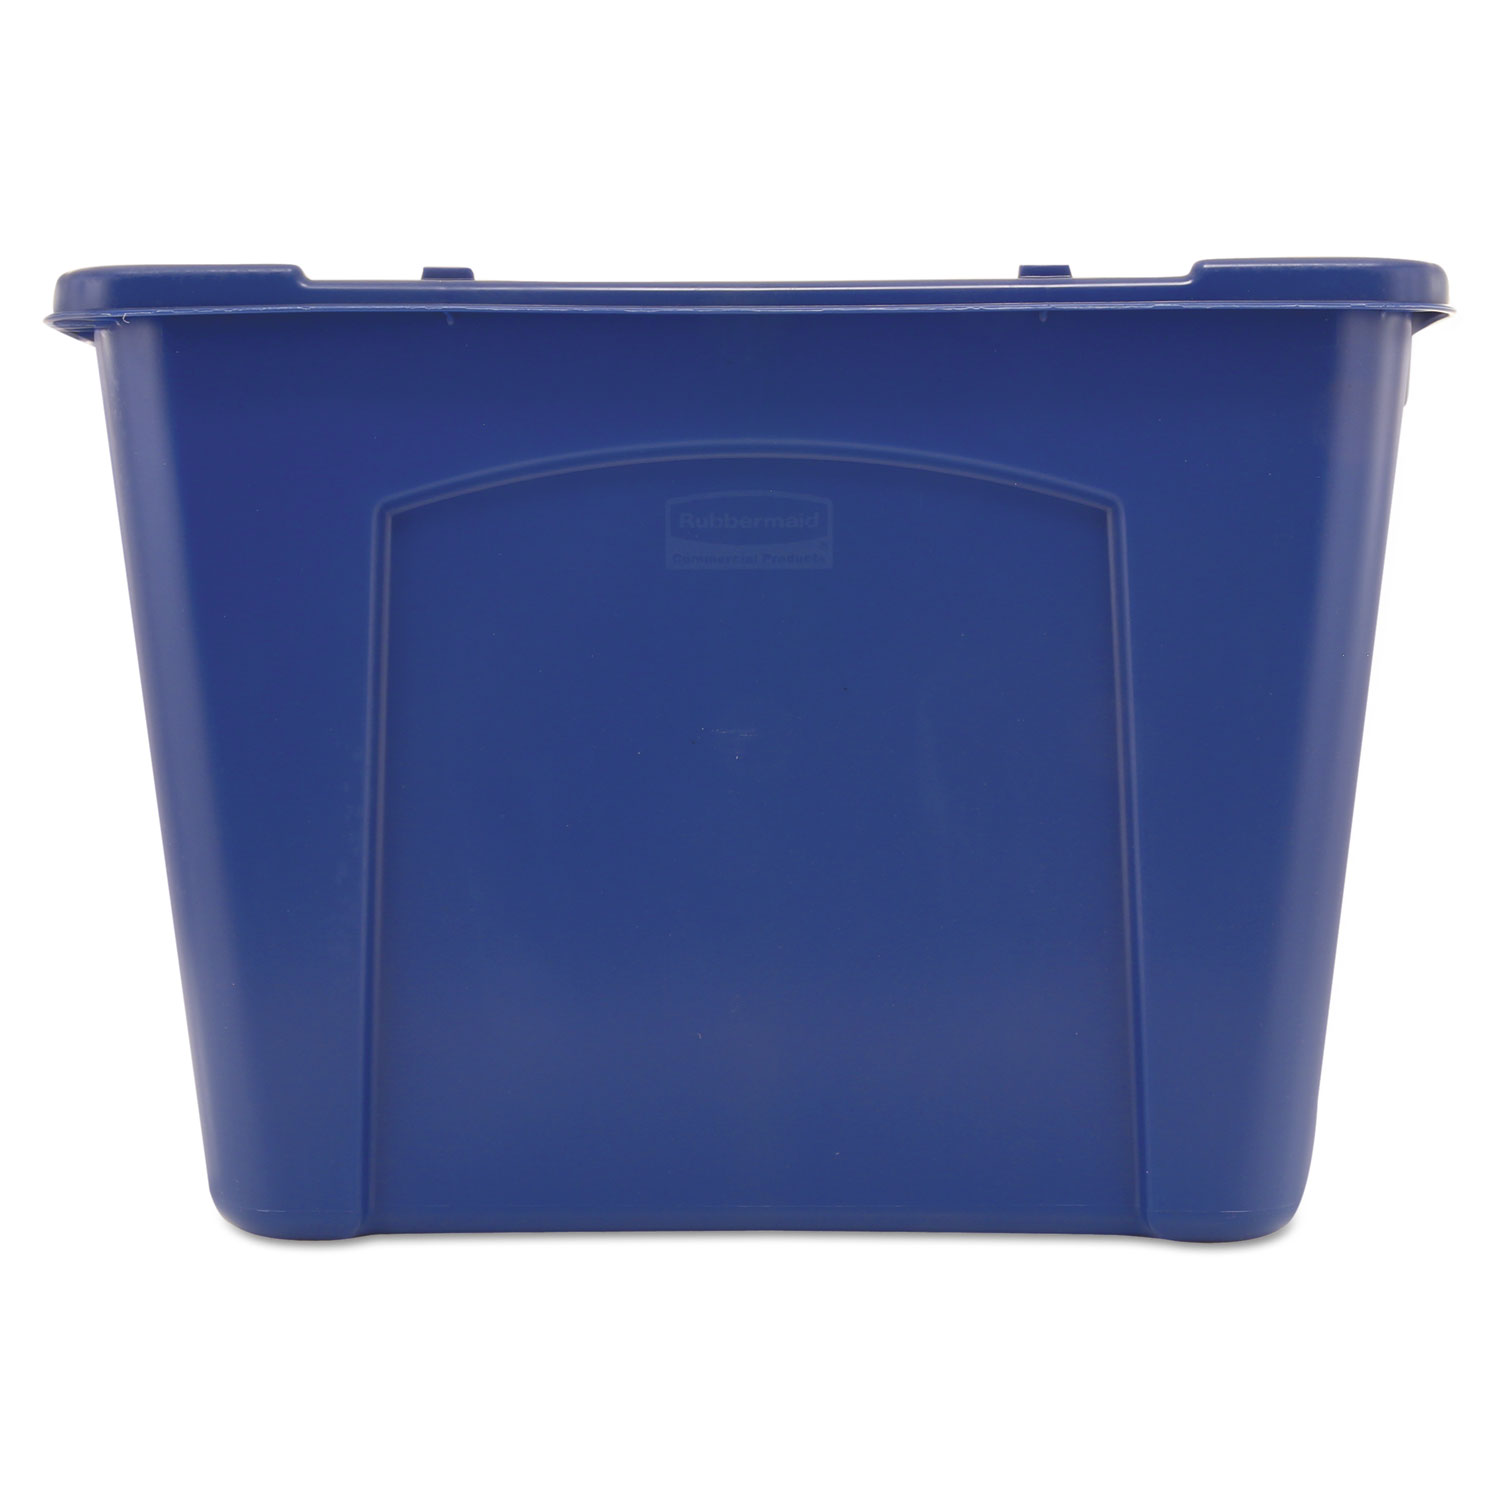 Details about   Rubbermaid Commercial Stacking Recycle Bin Rectangular Polyethylene 14gal Blue 